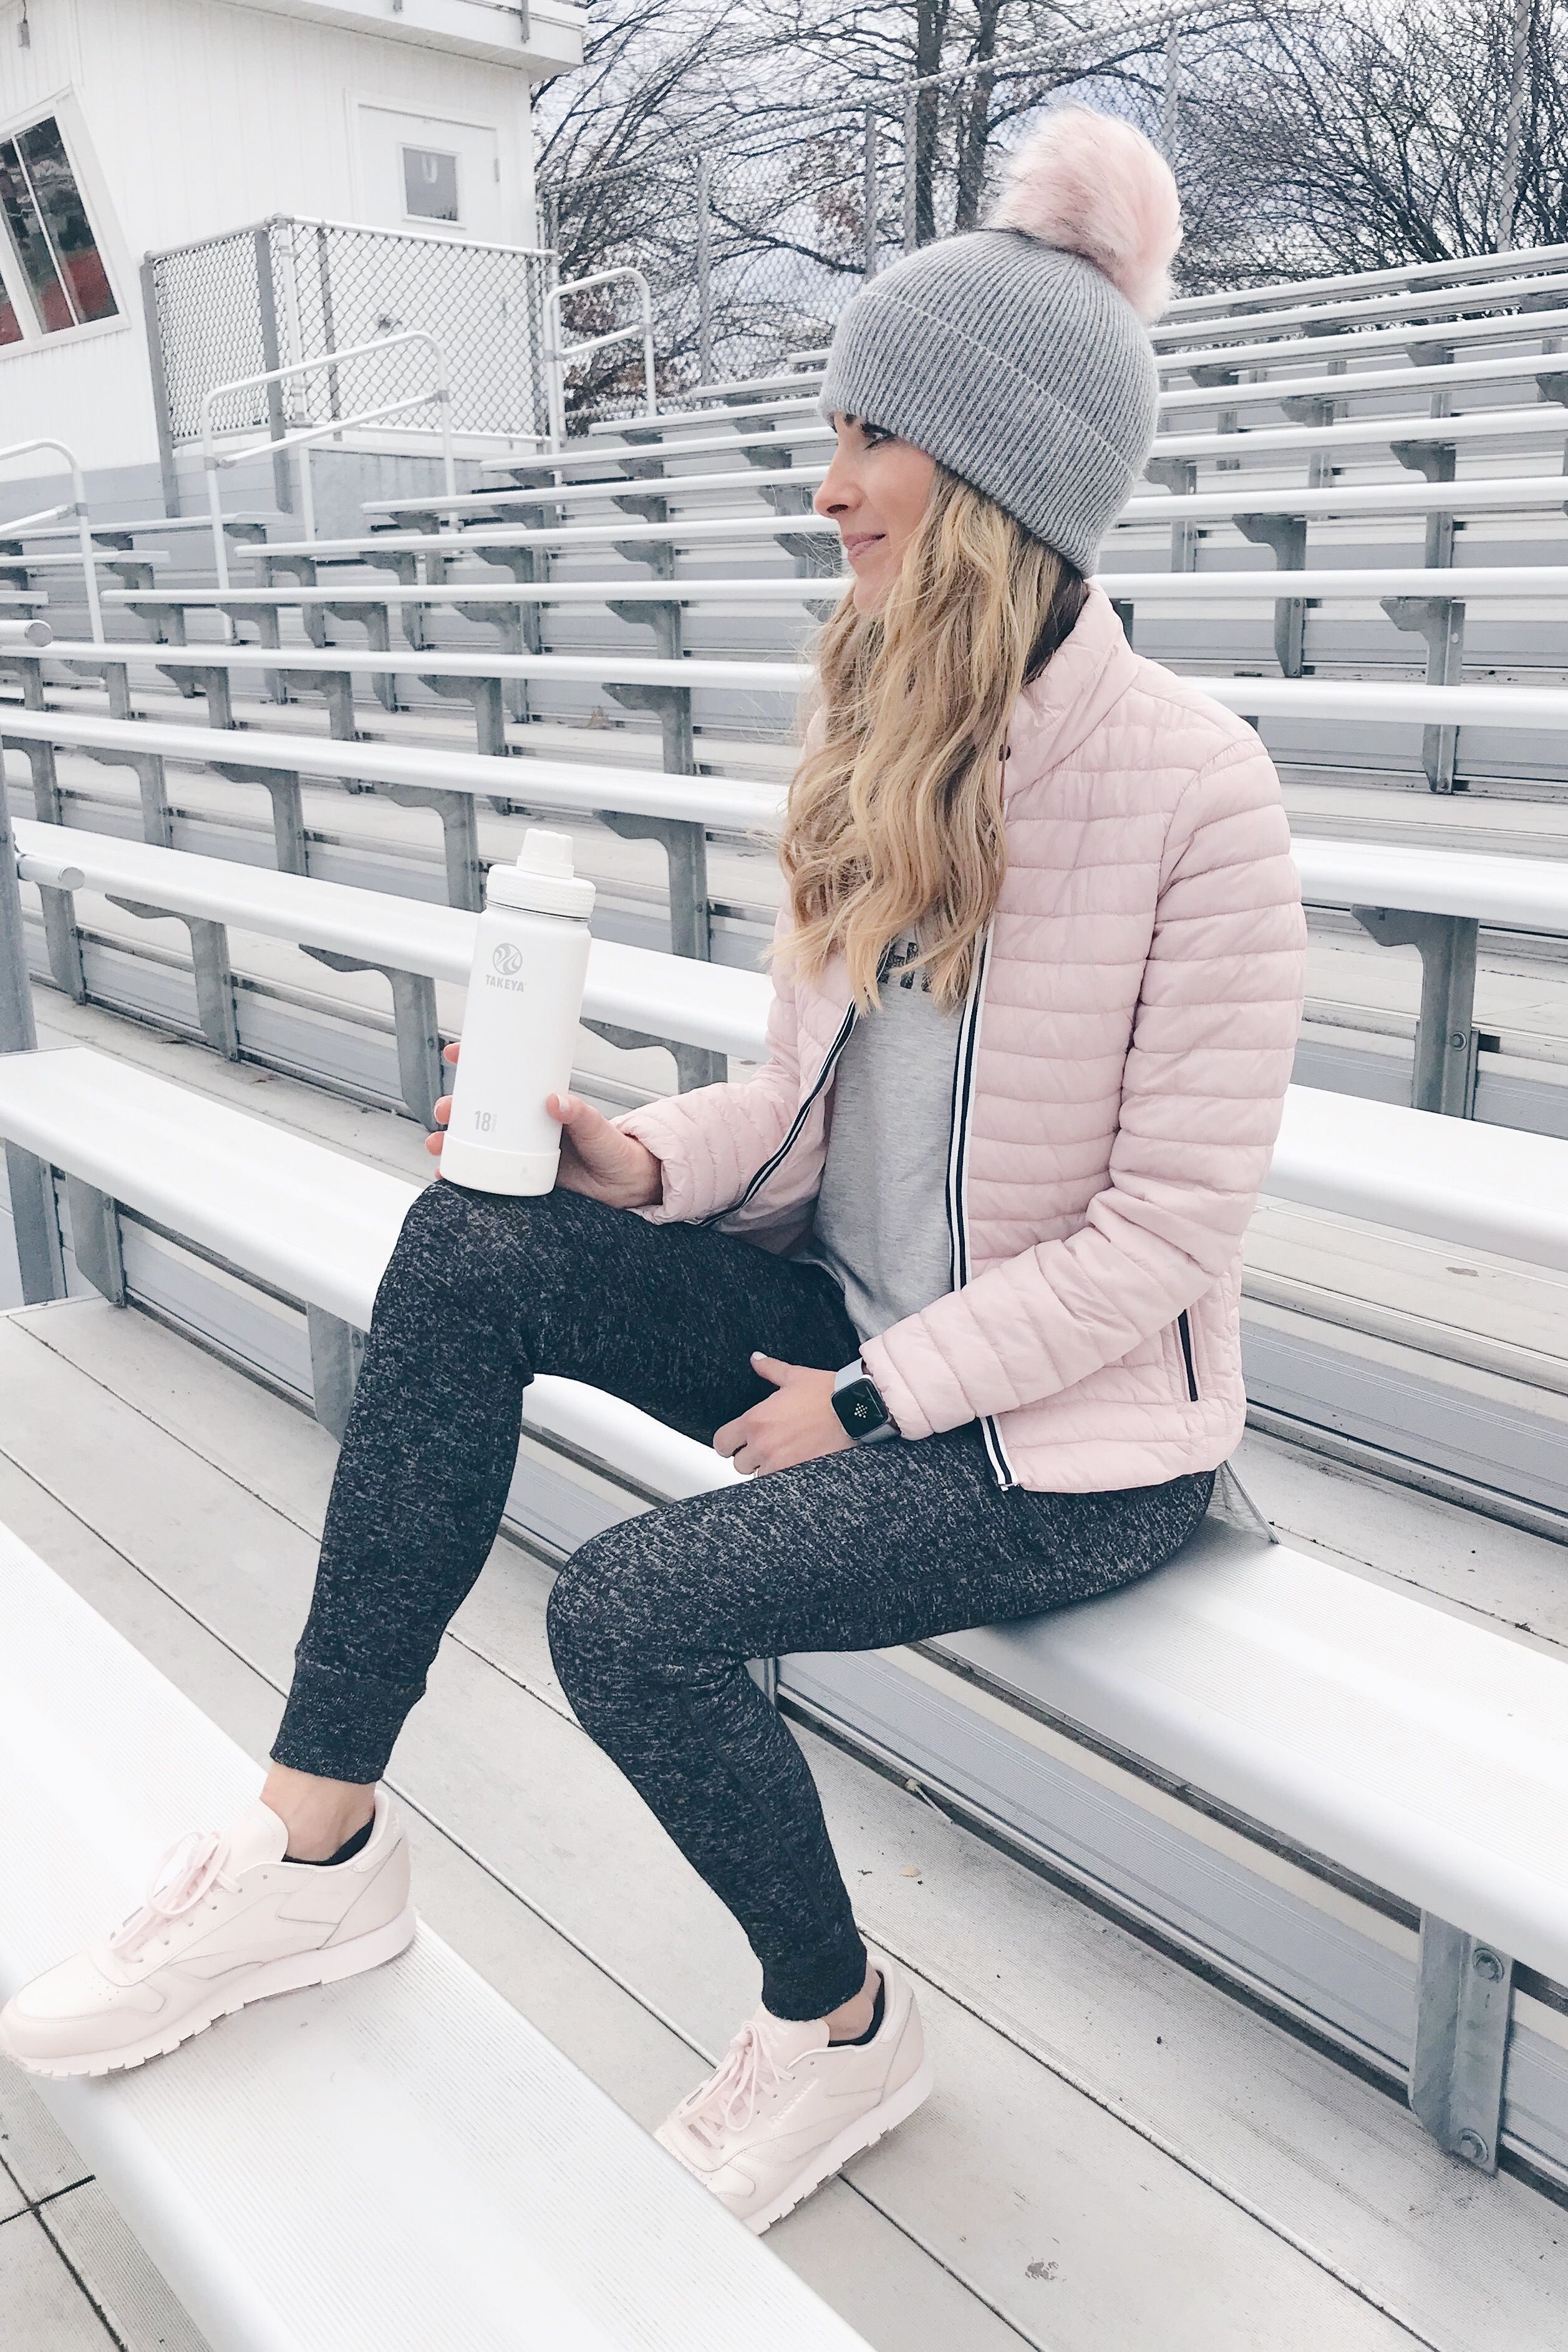 Winter Athleisure Outfit Ideas | Connecticut Style Blog - Winter Athleisure Outfit Ideas | Connecticut Style Blog -   17 fitness Fashion winter ideas